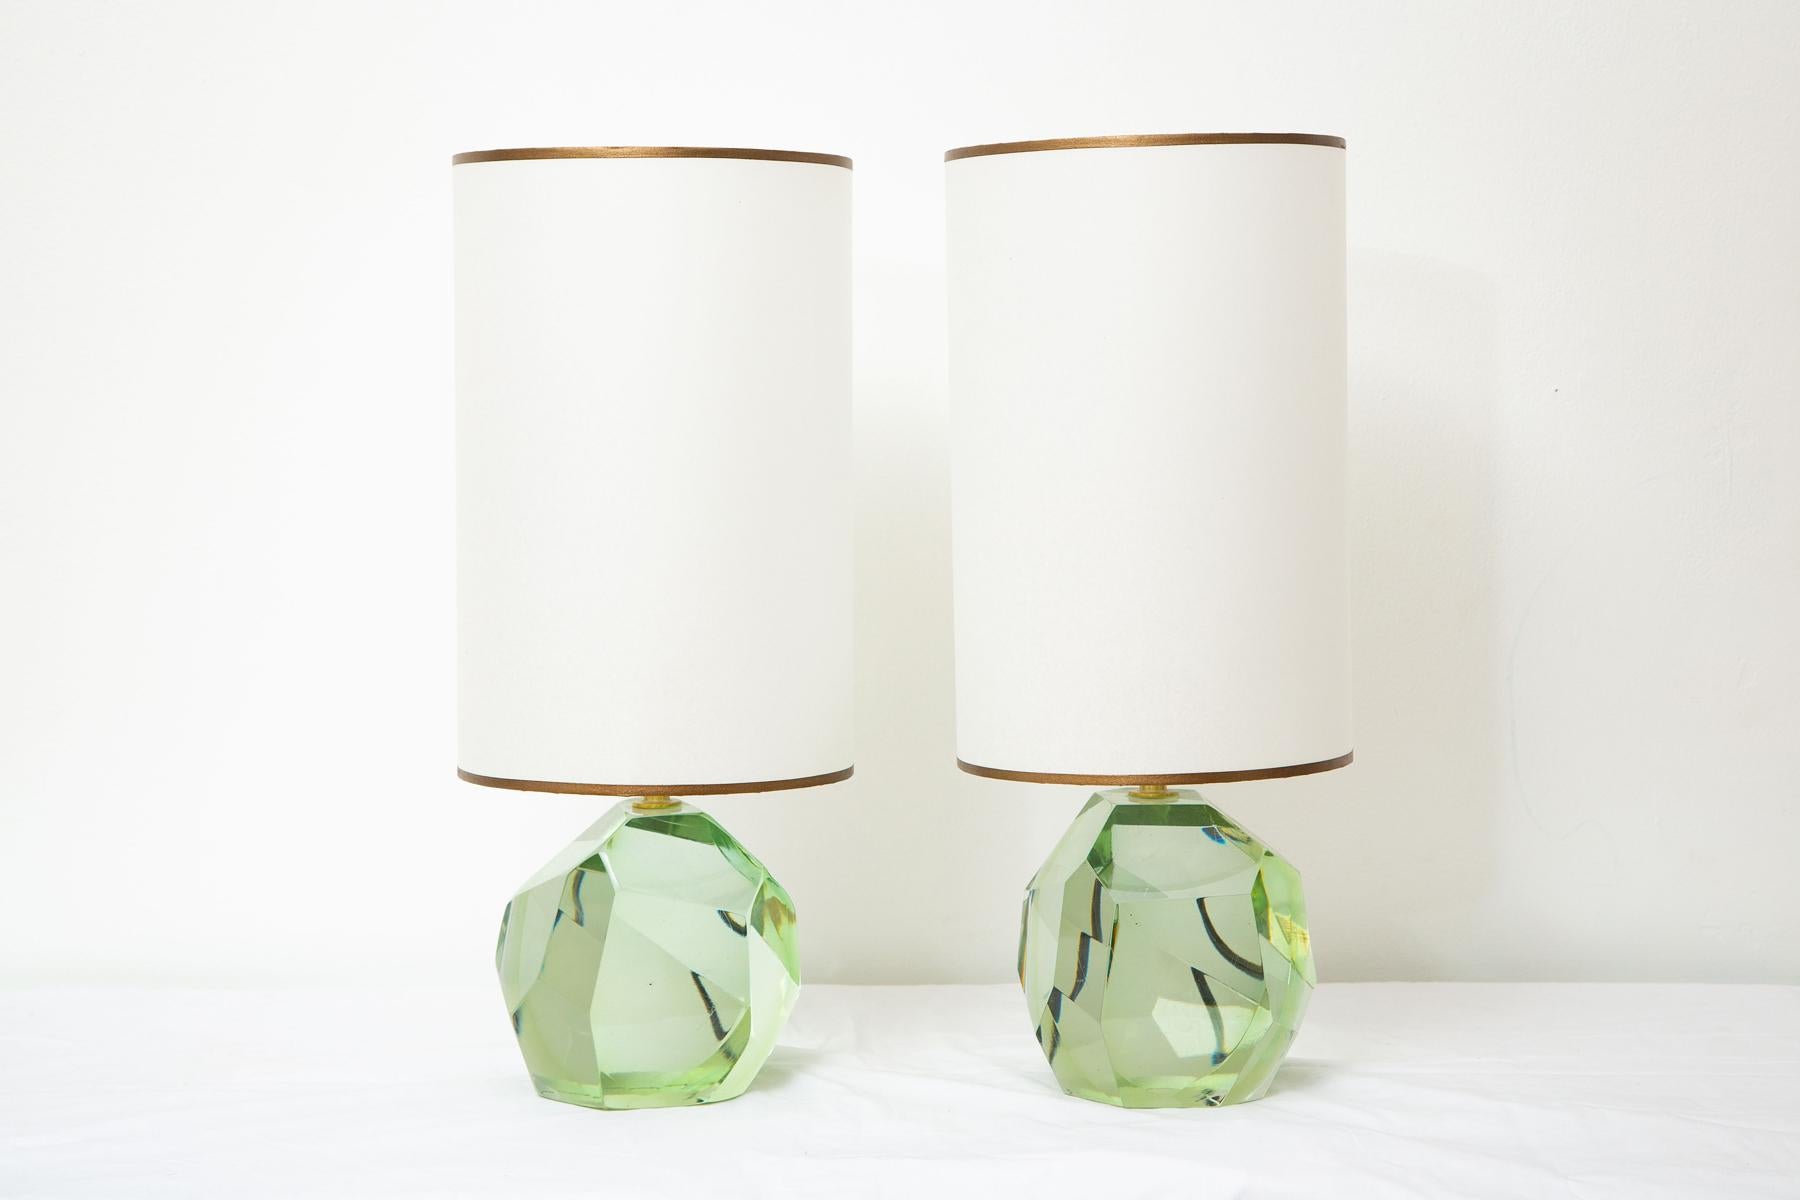 Pair of faceted diamond shaped murano green glass table lamps, in stock
Studio-made with translucent murano glass in aqua green hue.
Located in our store in Miami ready for shipping now.
Shades are included
Dimensions are with shades.